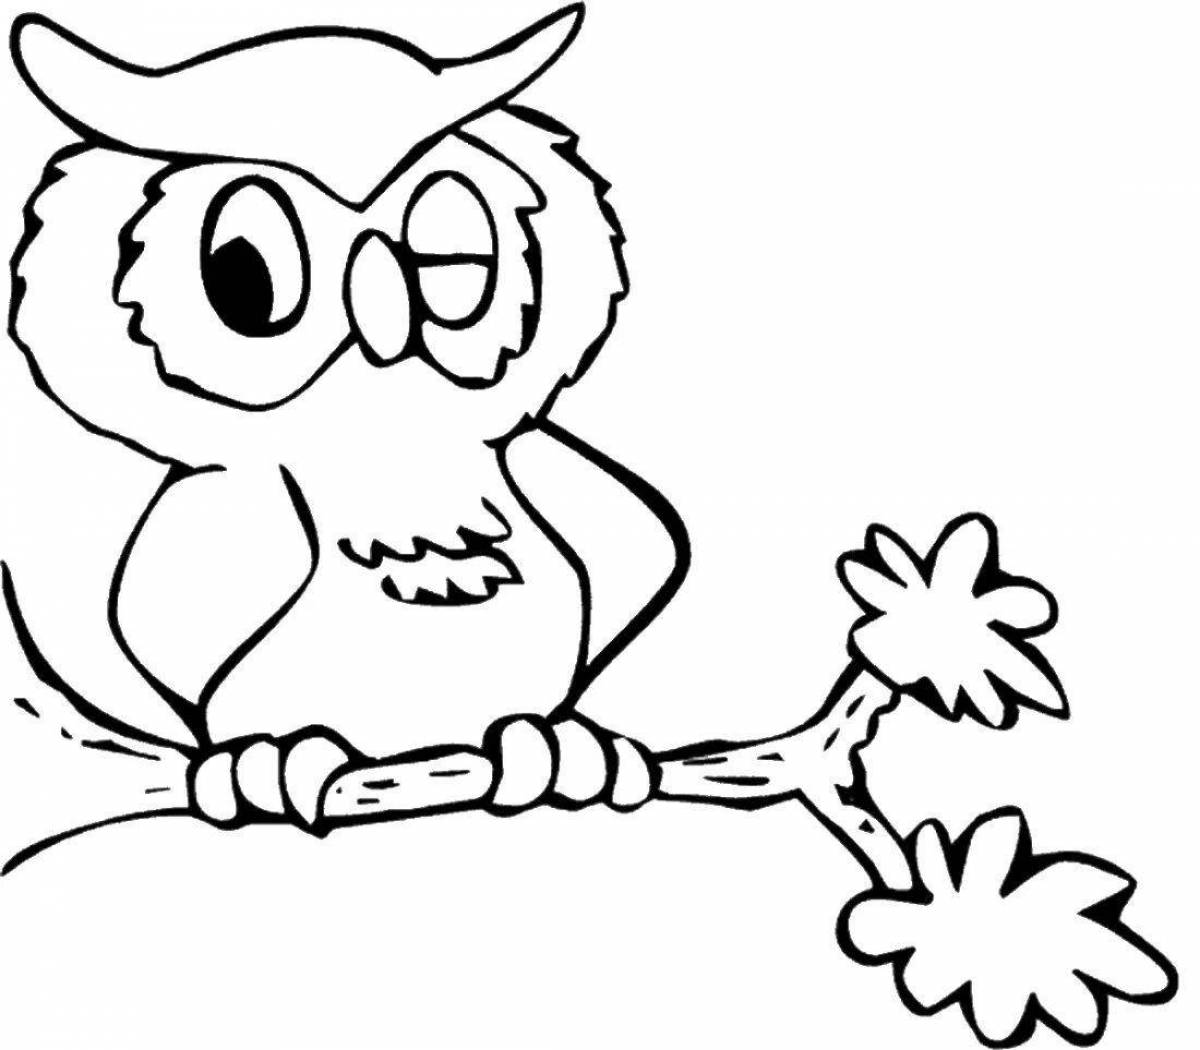 Owl for children 3 4 years old #2